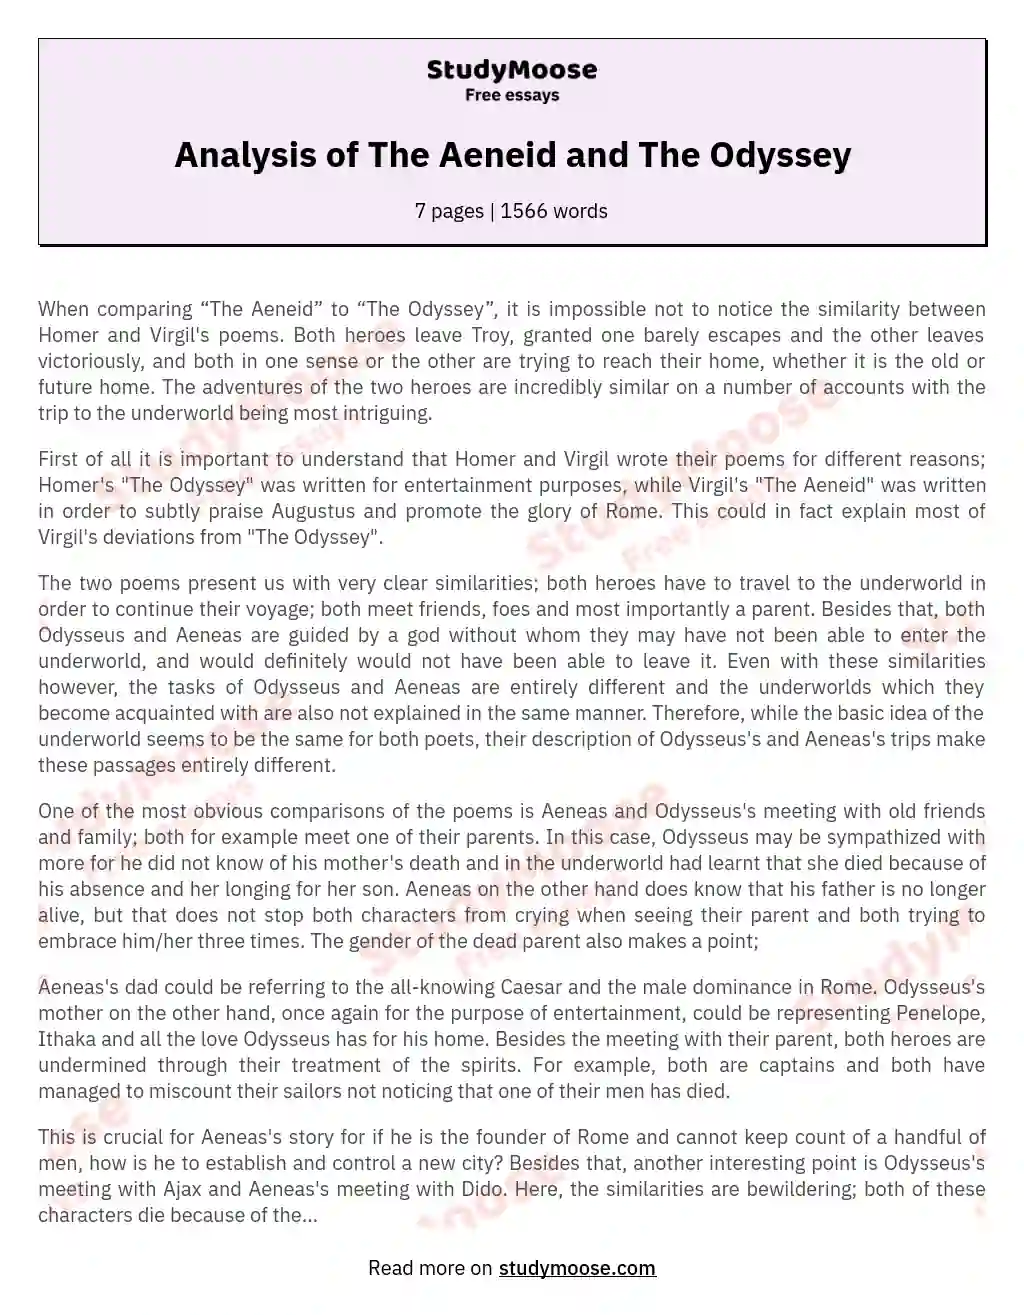 Analysis of The Aeneid and The Odyssey